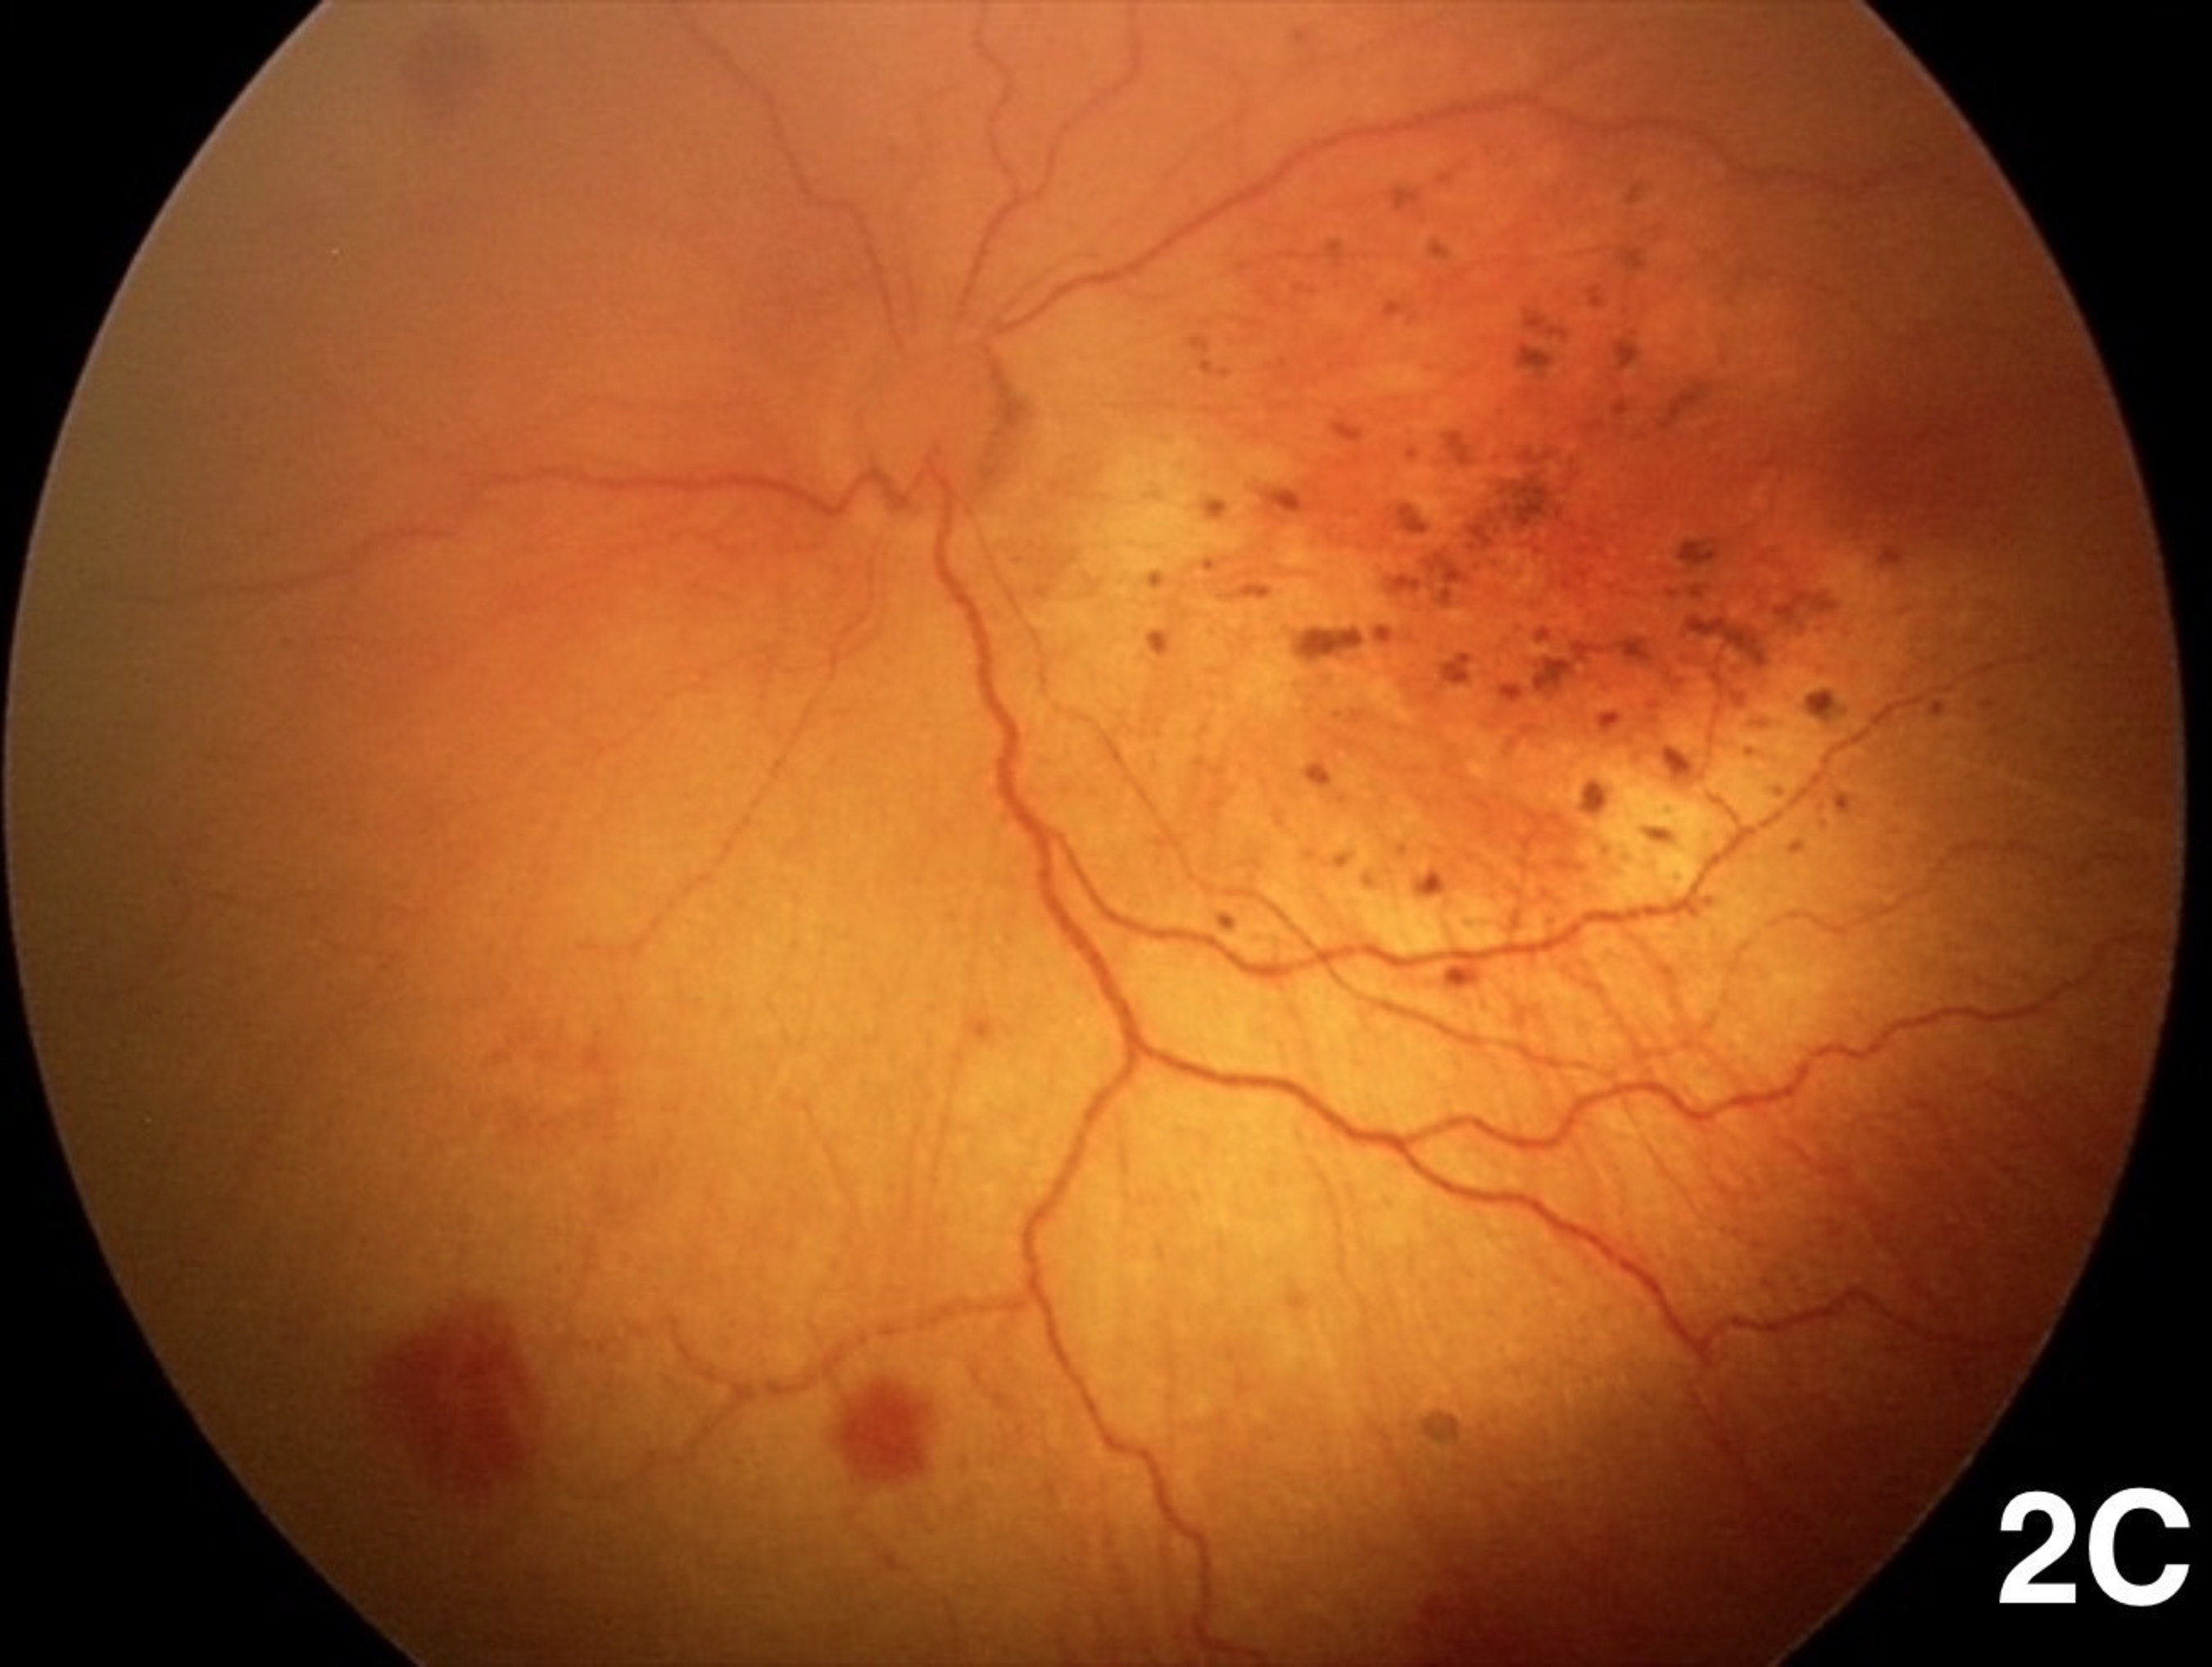 This image shows signs of retinal hemorrhaging in a baby with presumed Zika-induced microcephaly. Researchers from Brazil and Stanford University recently found additional eye abnormalities such as this in babies with Zika-induced microcephaly, according to a new study being published online May 25, 2016 in the journal Ophthalmology, journal of the American Academy of Ophthalmology.